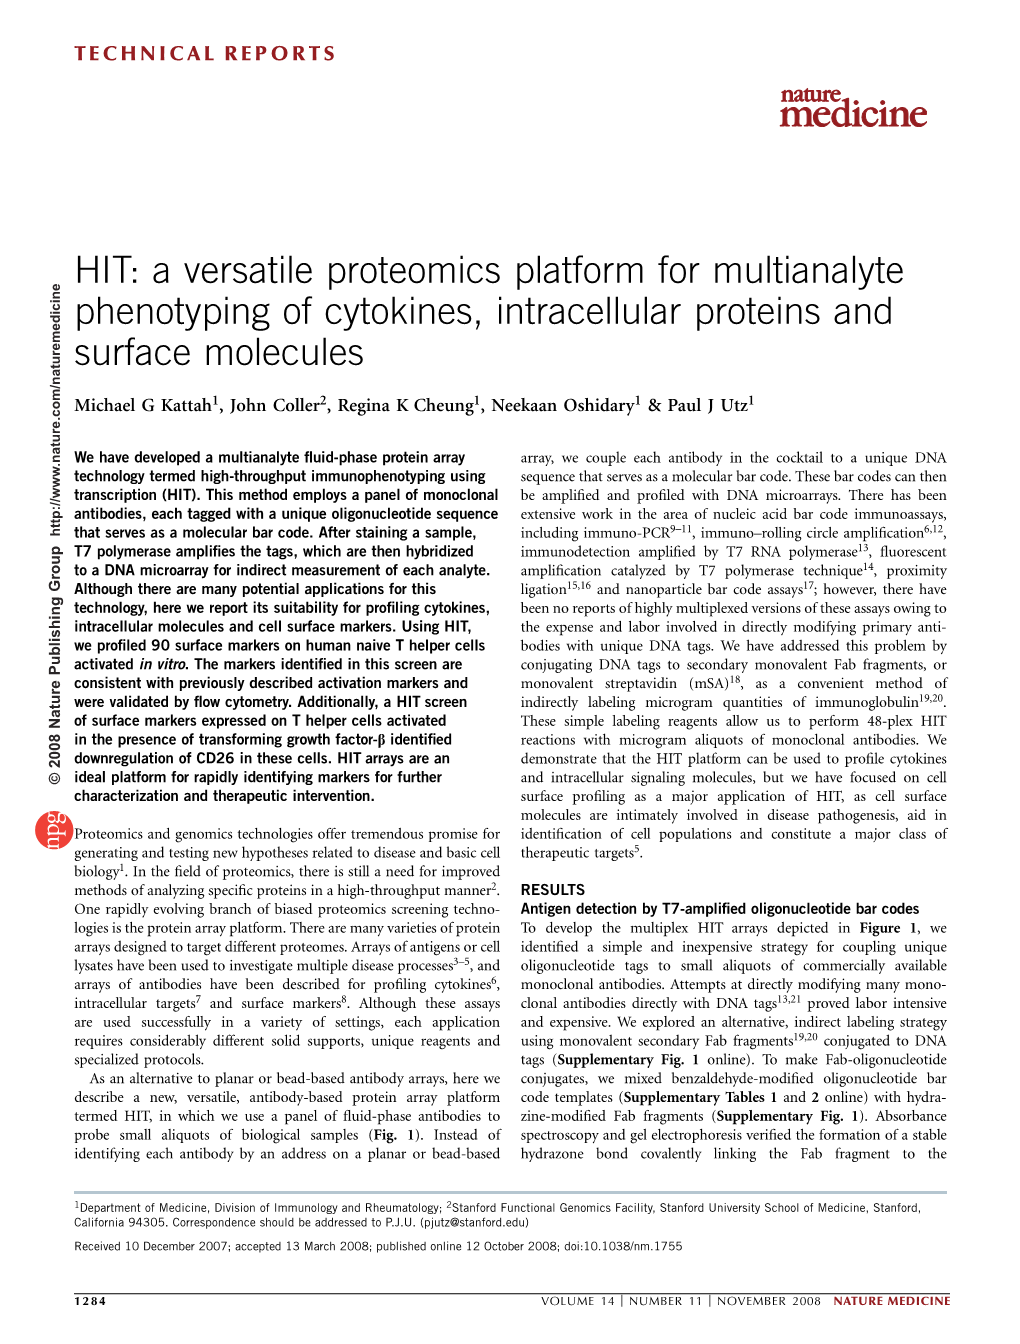 HIT: a Versatile Proteomics Platform for Multianalyte Phenotyping of Cytokines, Intracellular Proteins and Surface Molecules